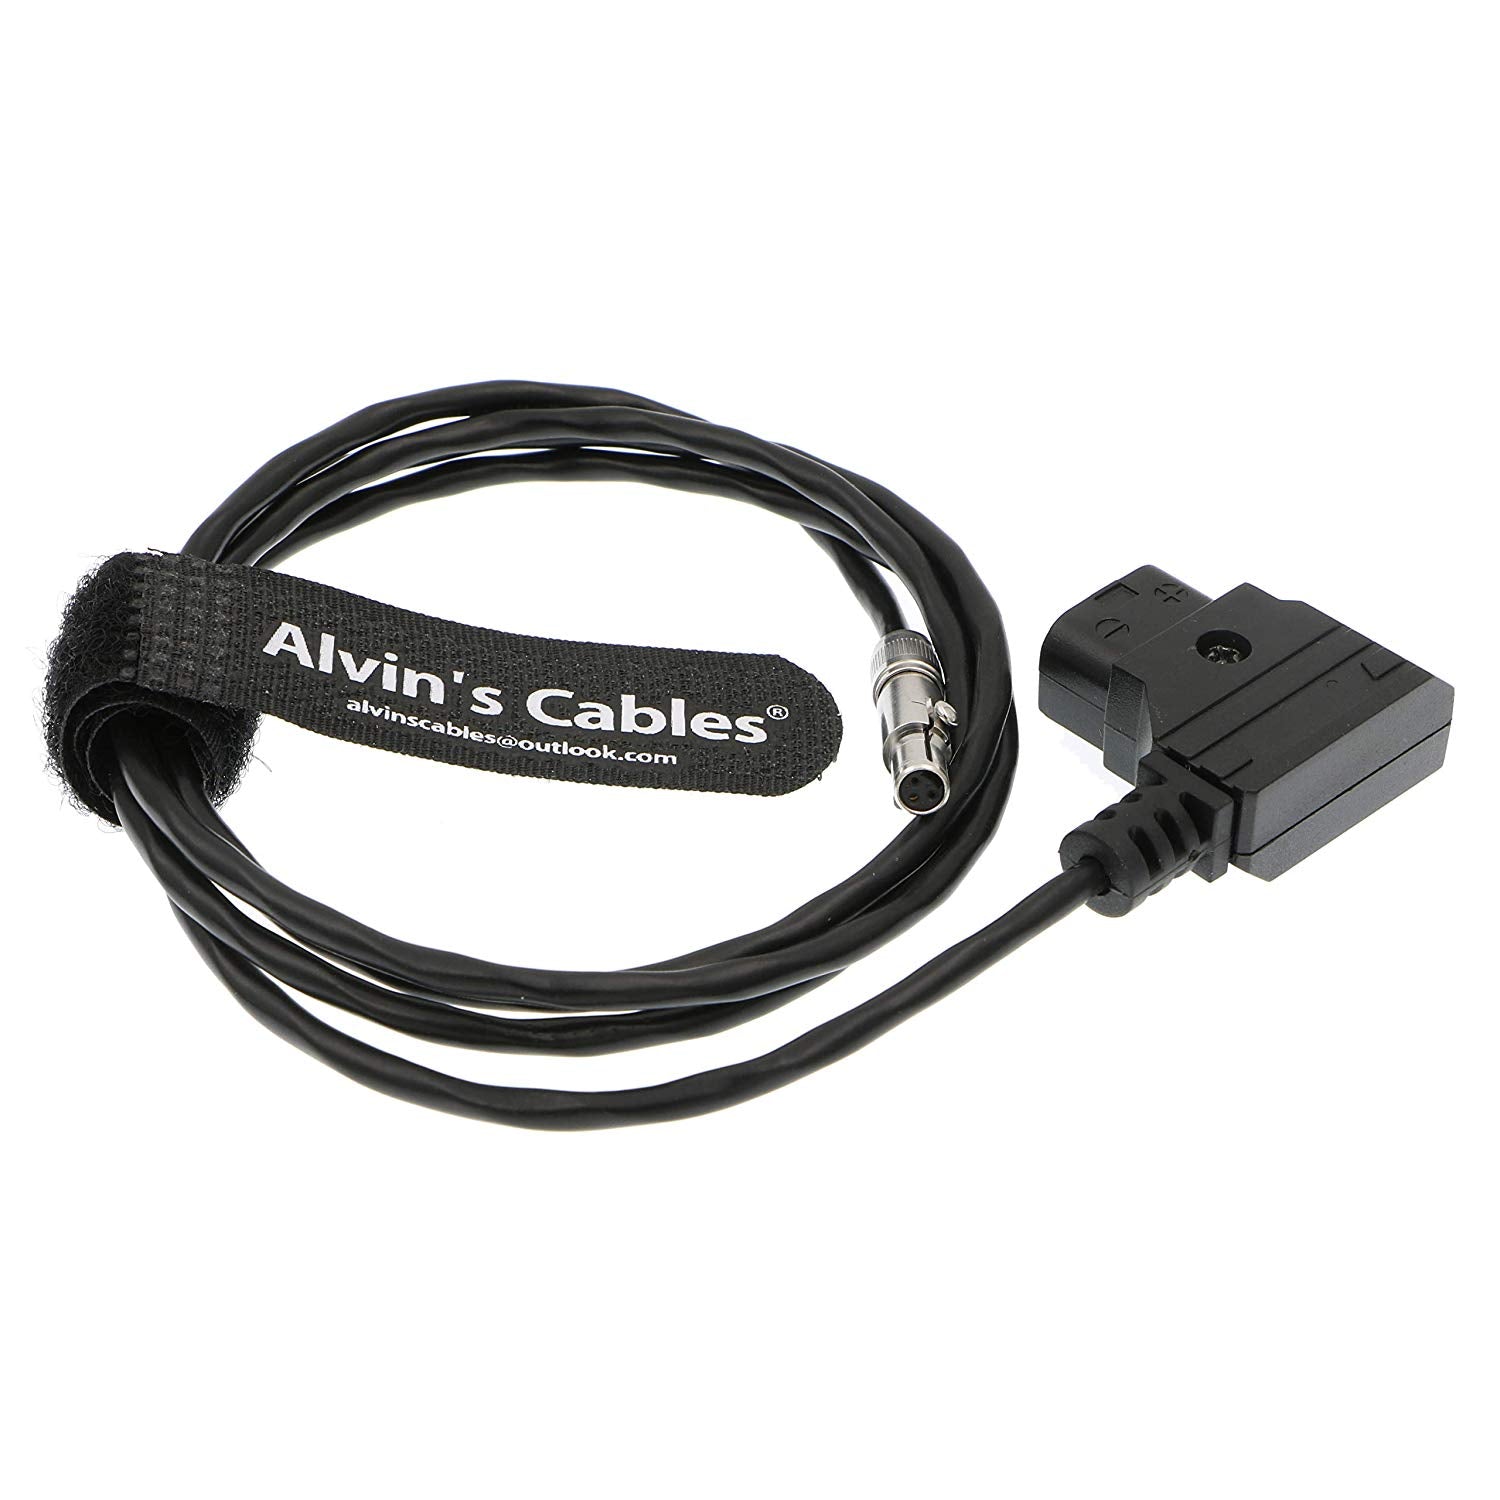 Alvin's Cables Odyssey 7Q Monitor Power Cable 3 Pin Female to D Tap Cord